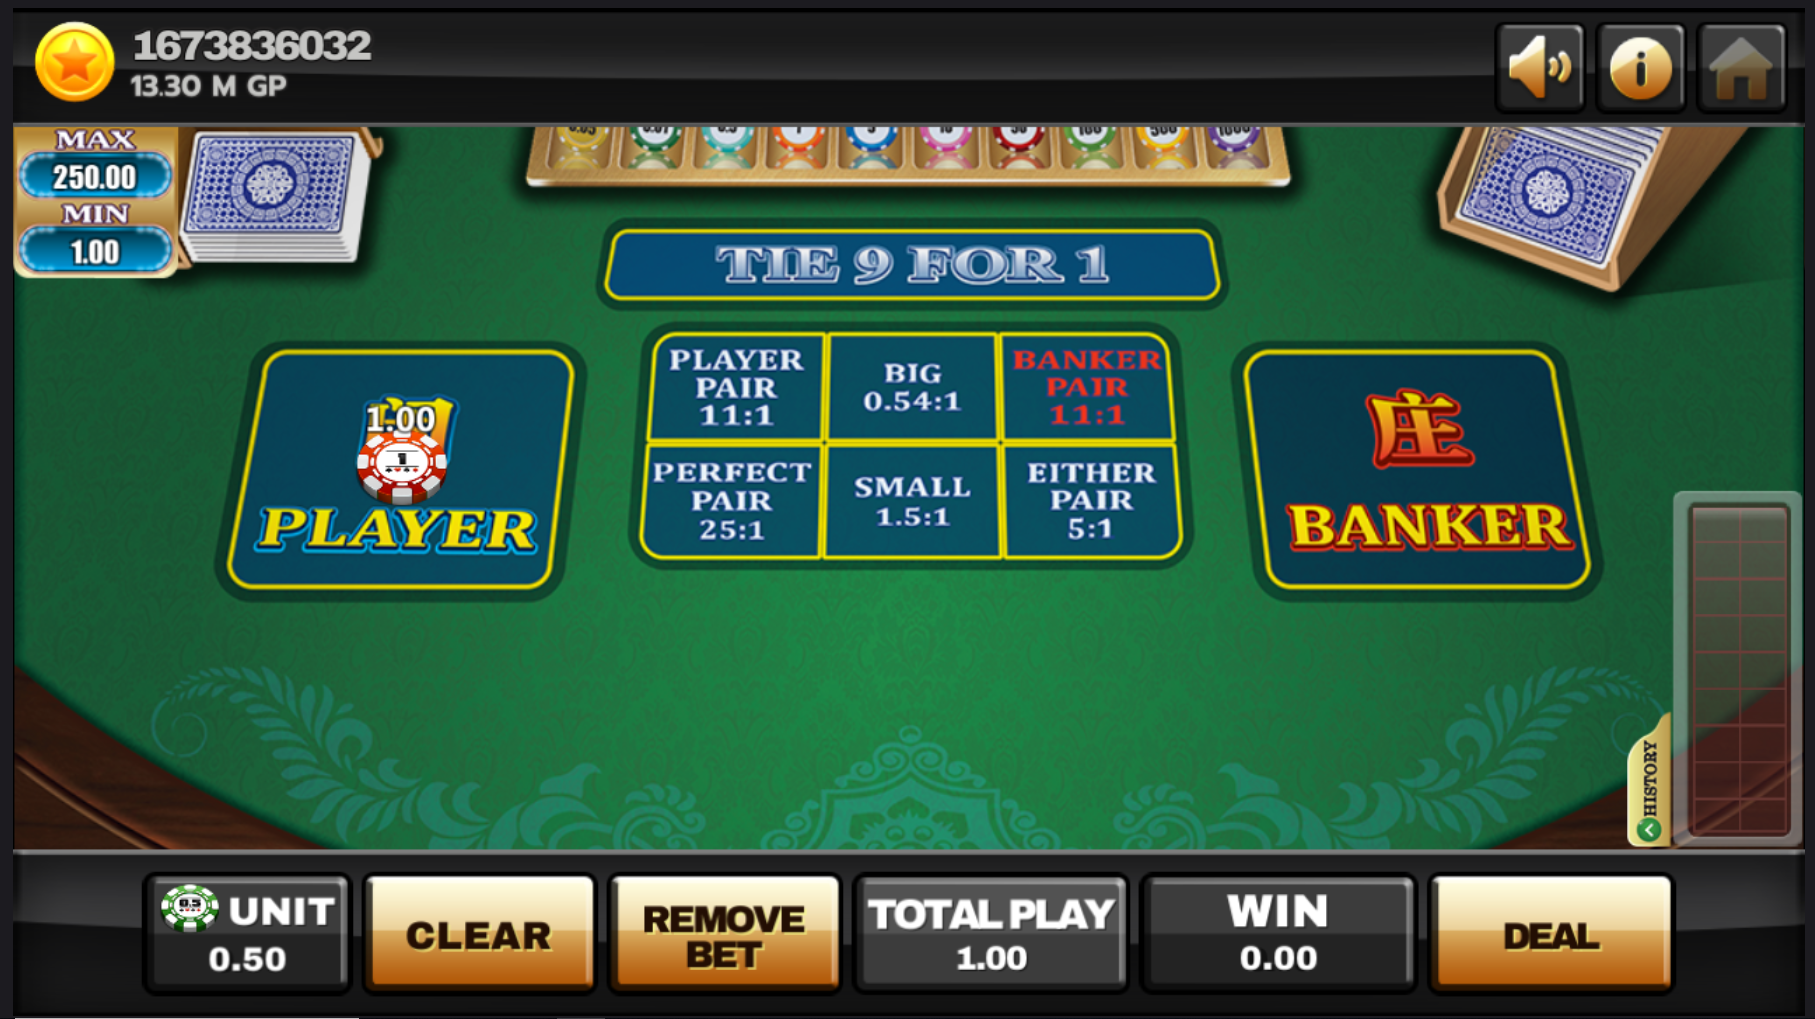 BACCARAT_3.png - 2.36 MB